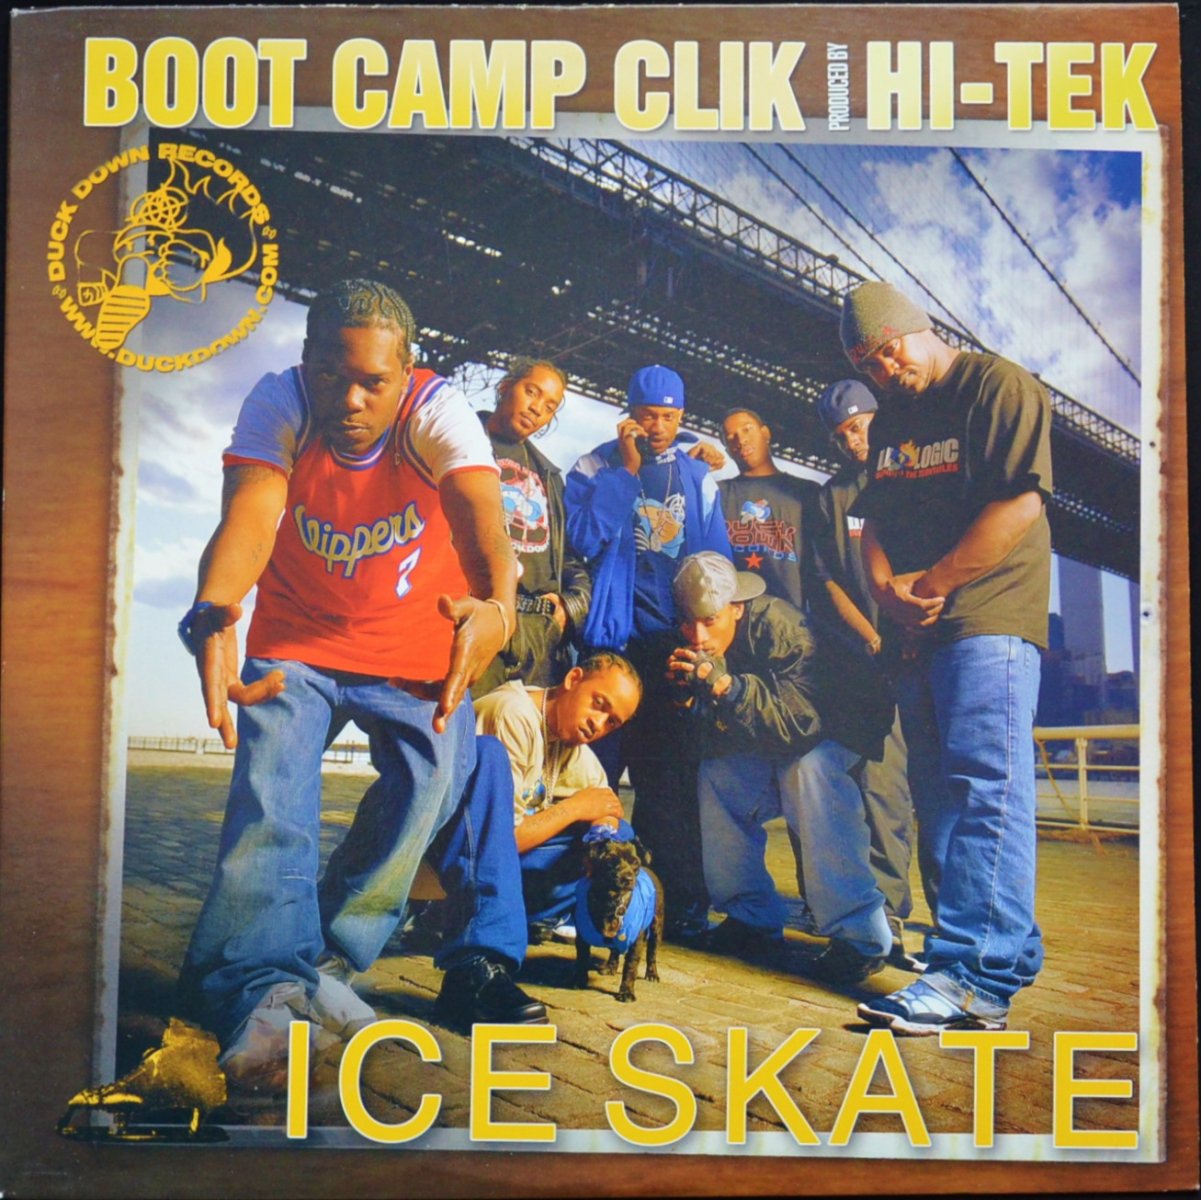 BOOT CAMP CLIK / ICE SKATE (PROD BY HI-TEK) / WELCOME 2 BUCTOWN 